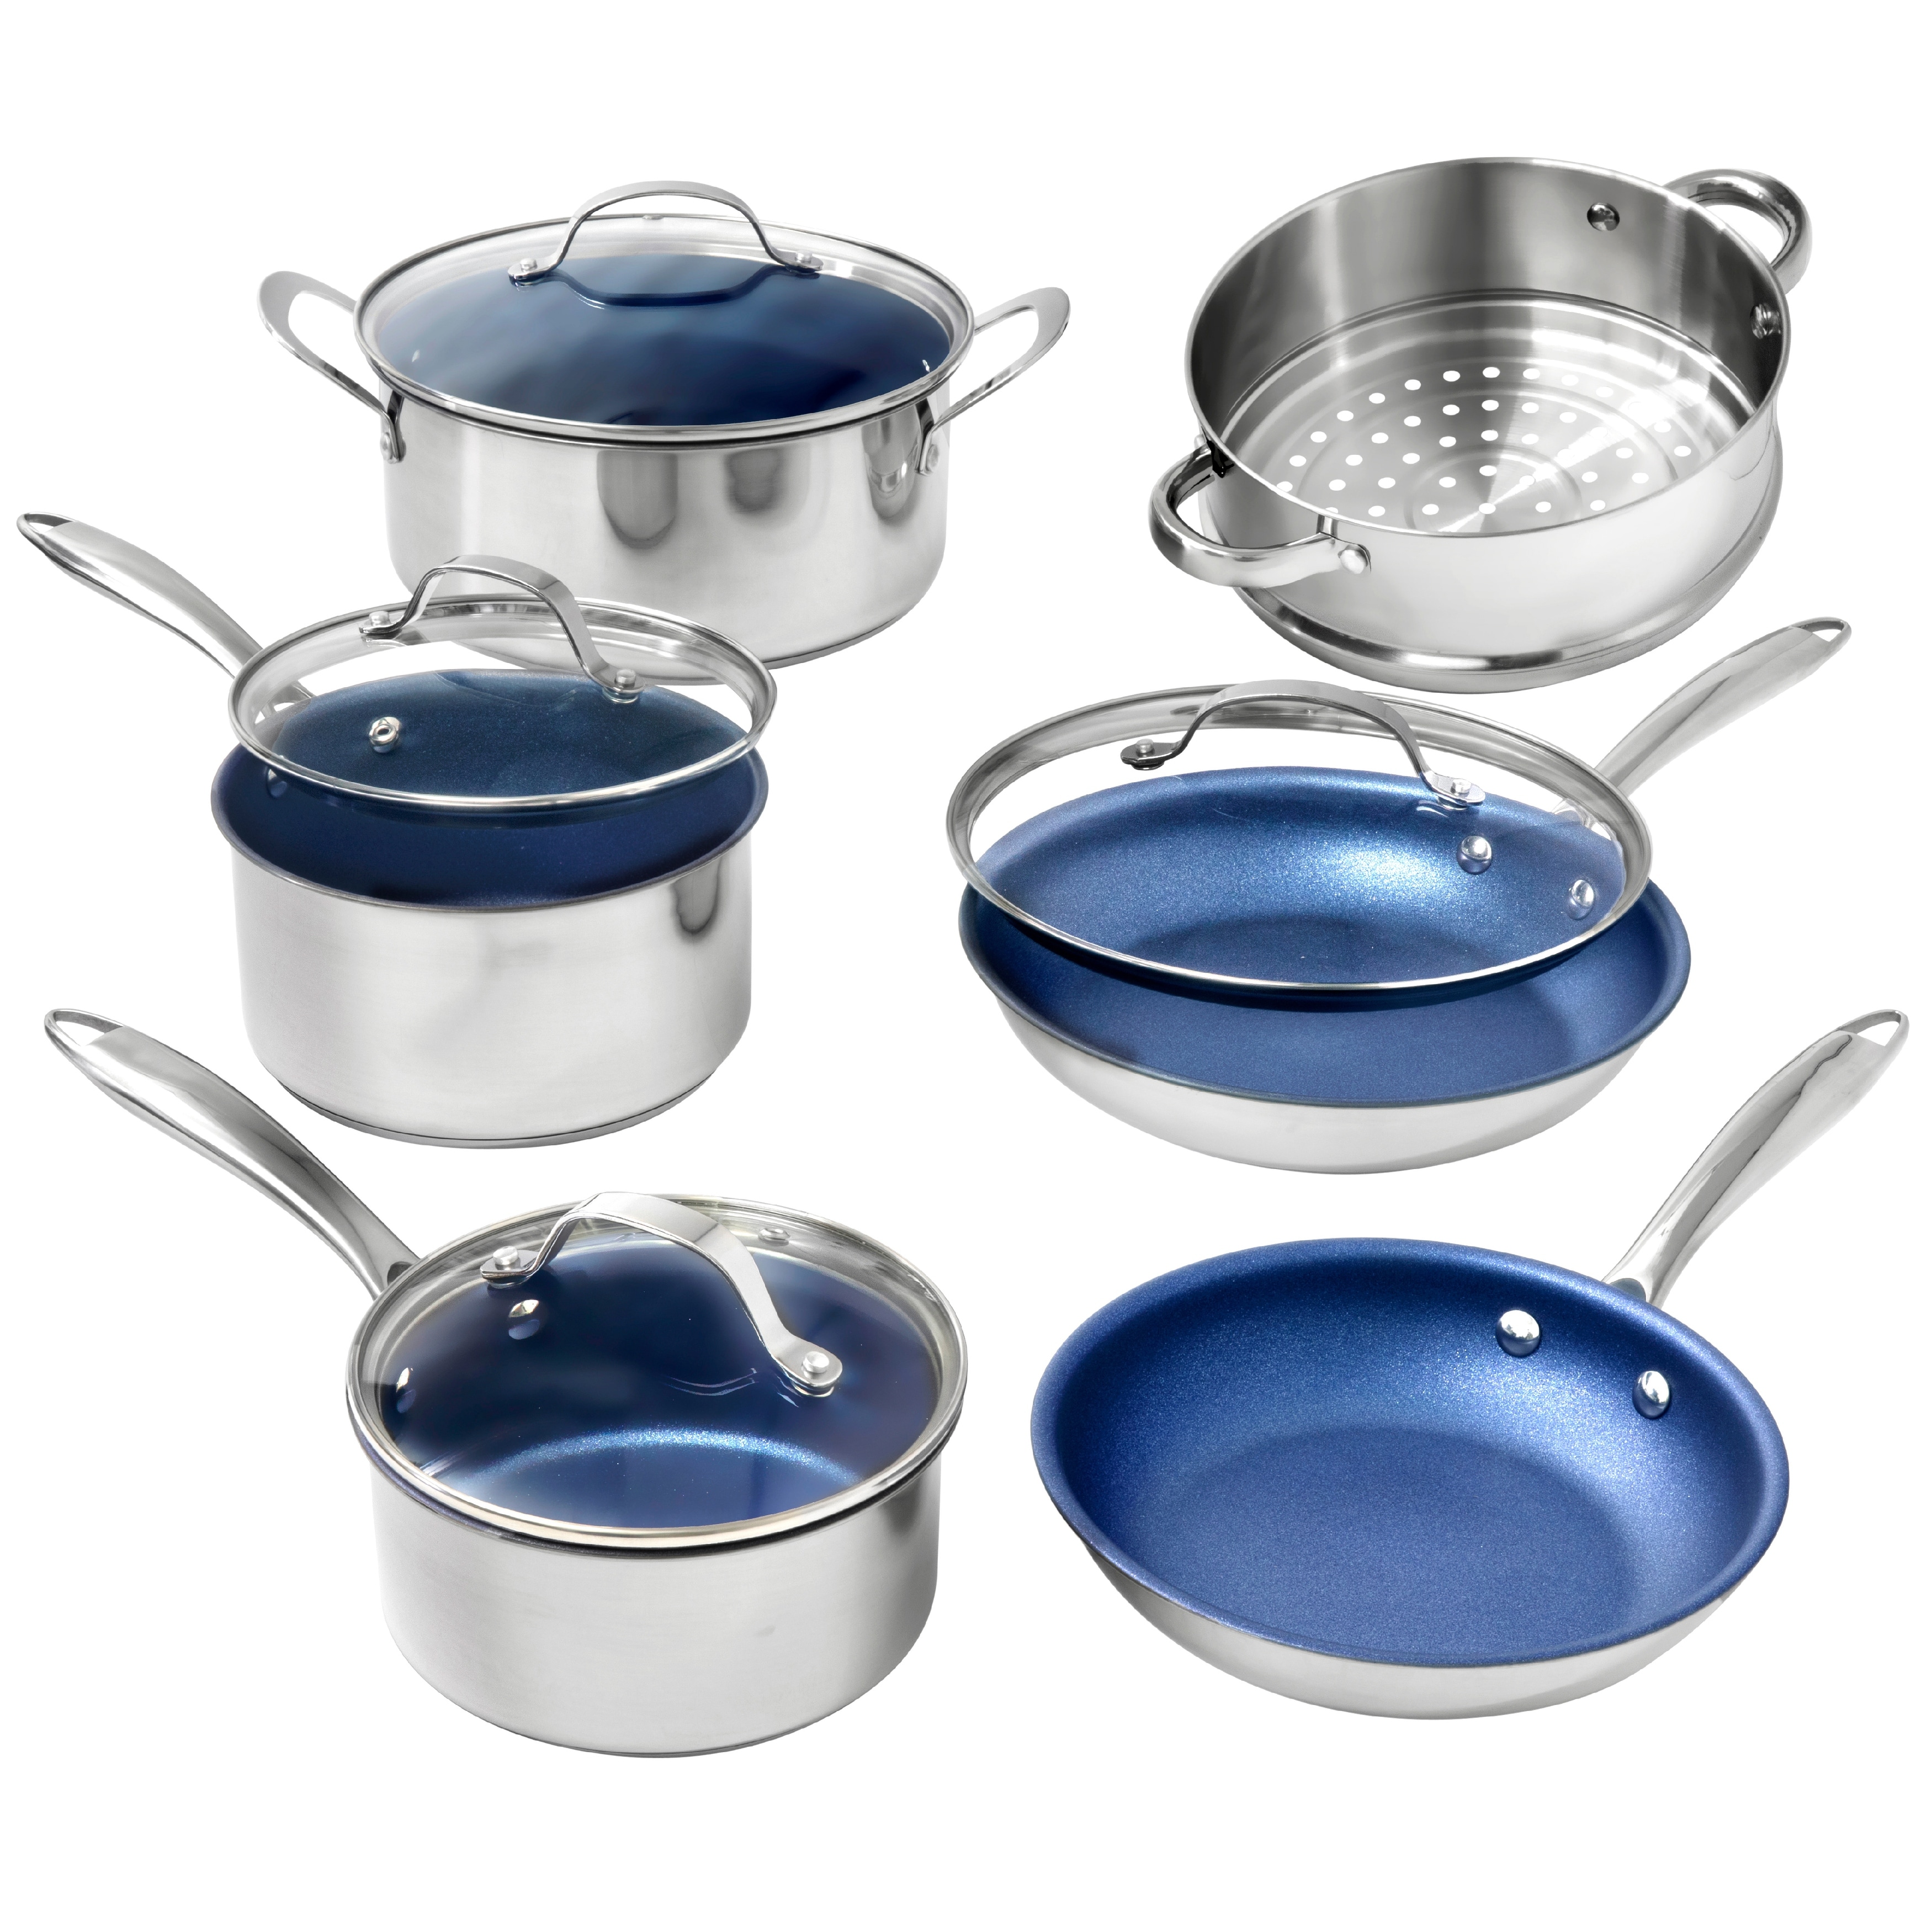 https://ak1.ostkcdn.com/images/products/is/images/direct/1df2ee11a2d0e99ae9db11606d73c4e16968e43d/Granitestone-Blue-Stainless-steel-10-Piece-Cookware-Set.jpg